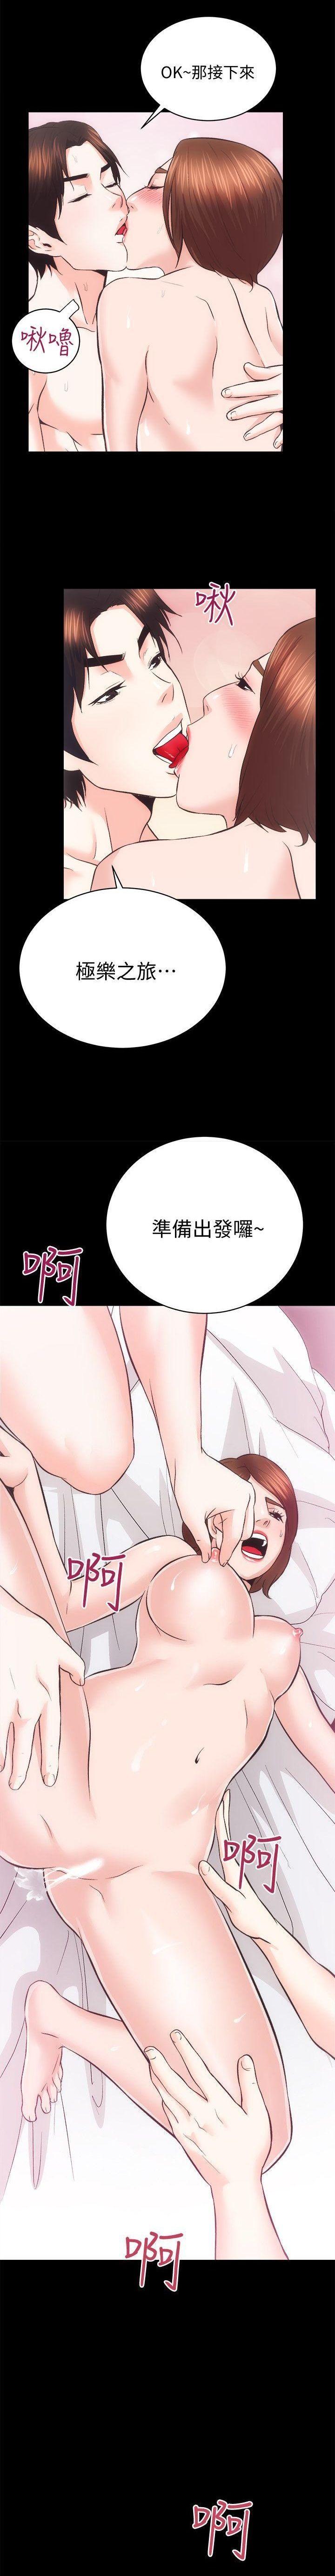 Freeteenporn 性溢房屋 Chapter 21-25 Pegging - Page 52